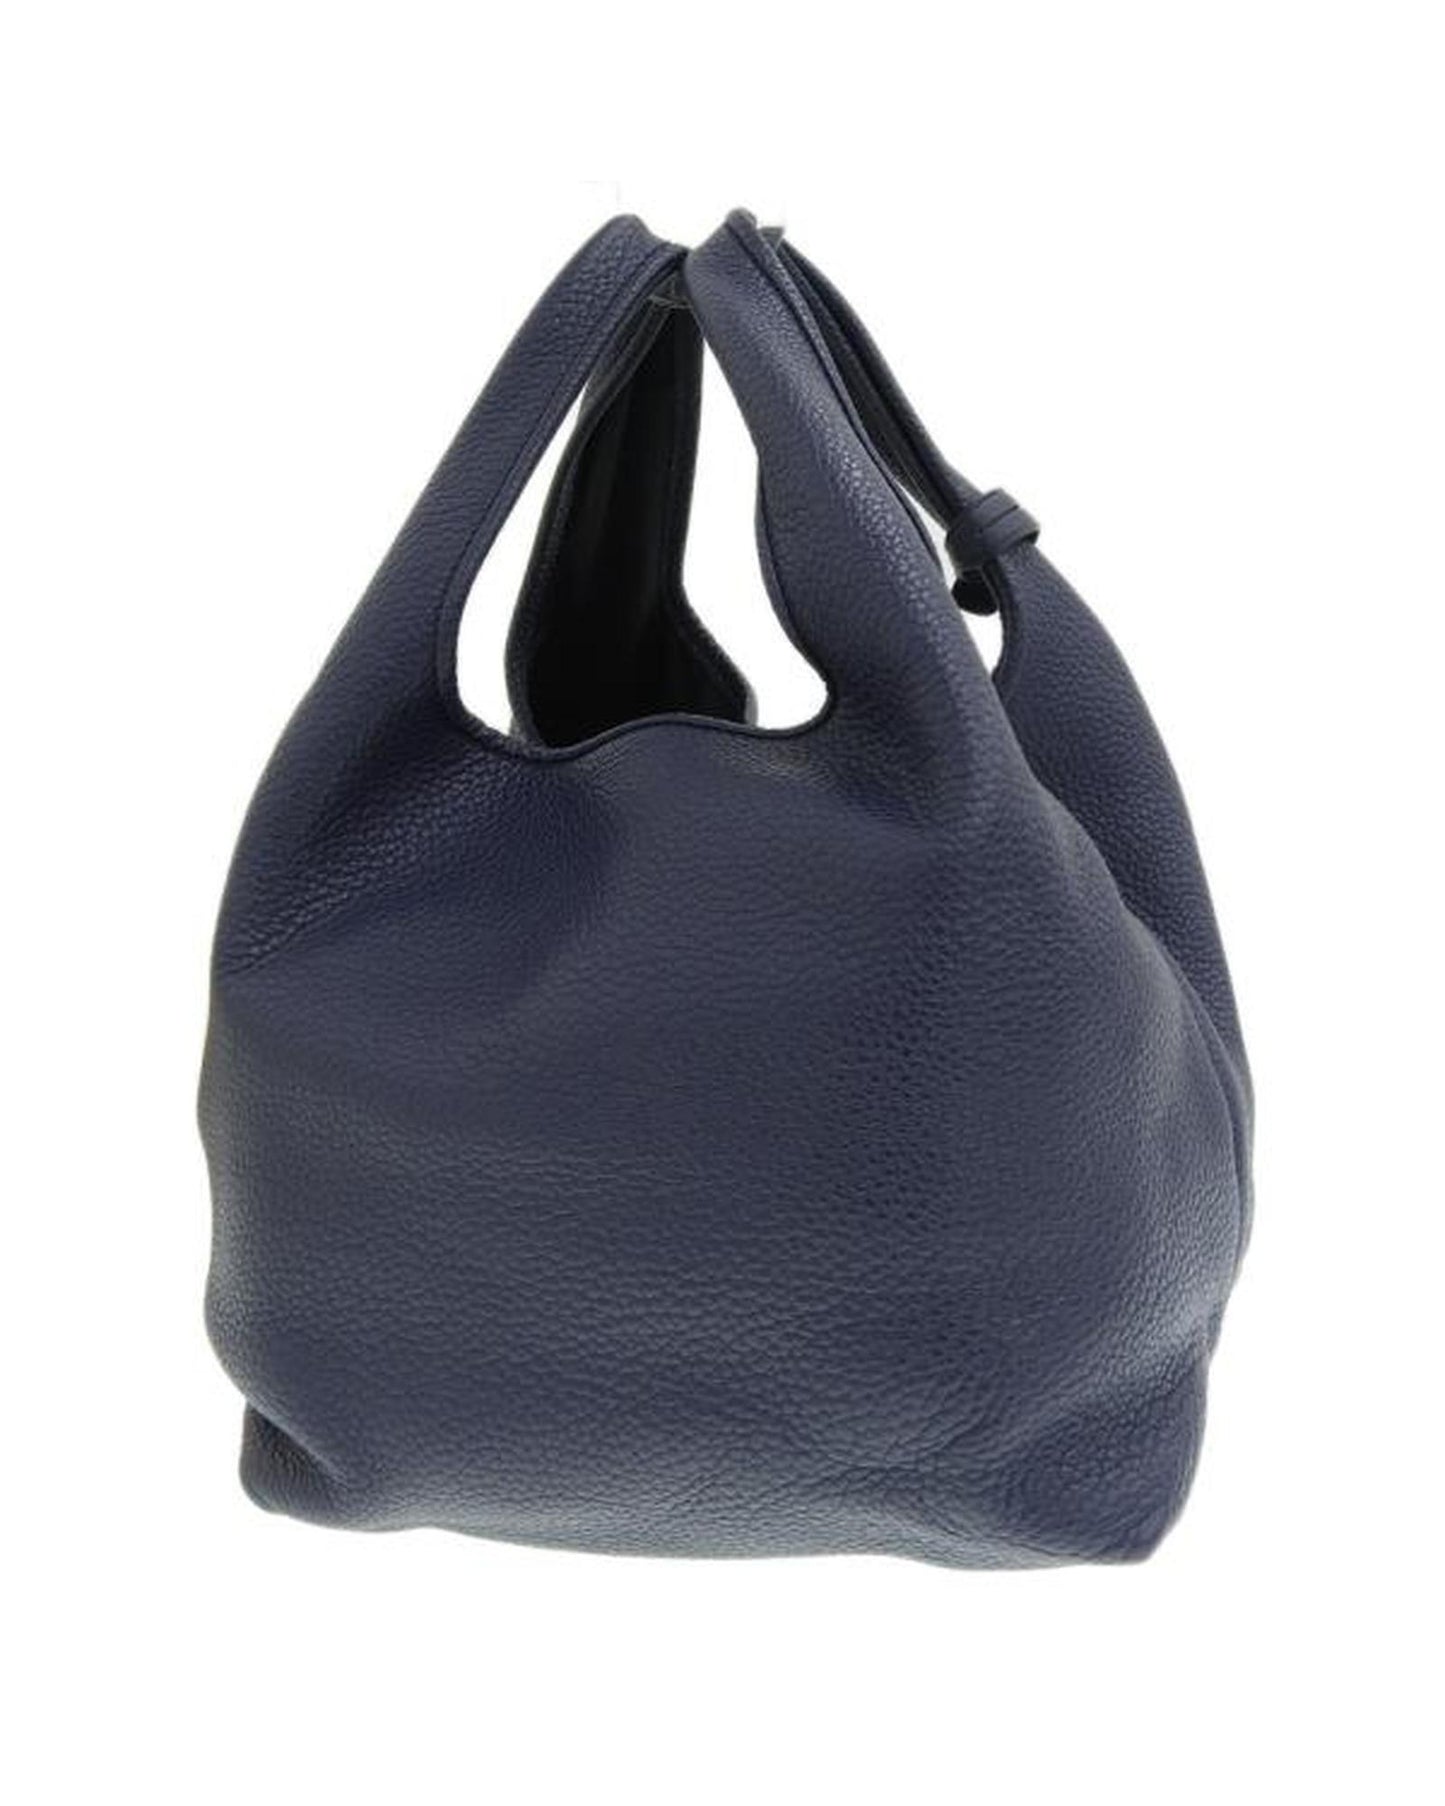 Loewe Women's Blue Leather Bucket Bag in Excellent Condition in Blue